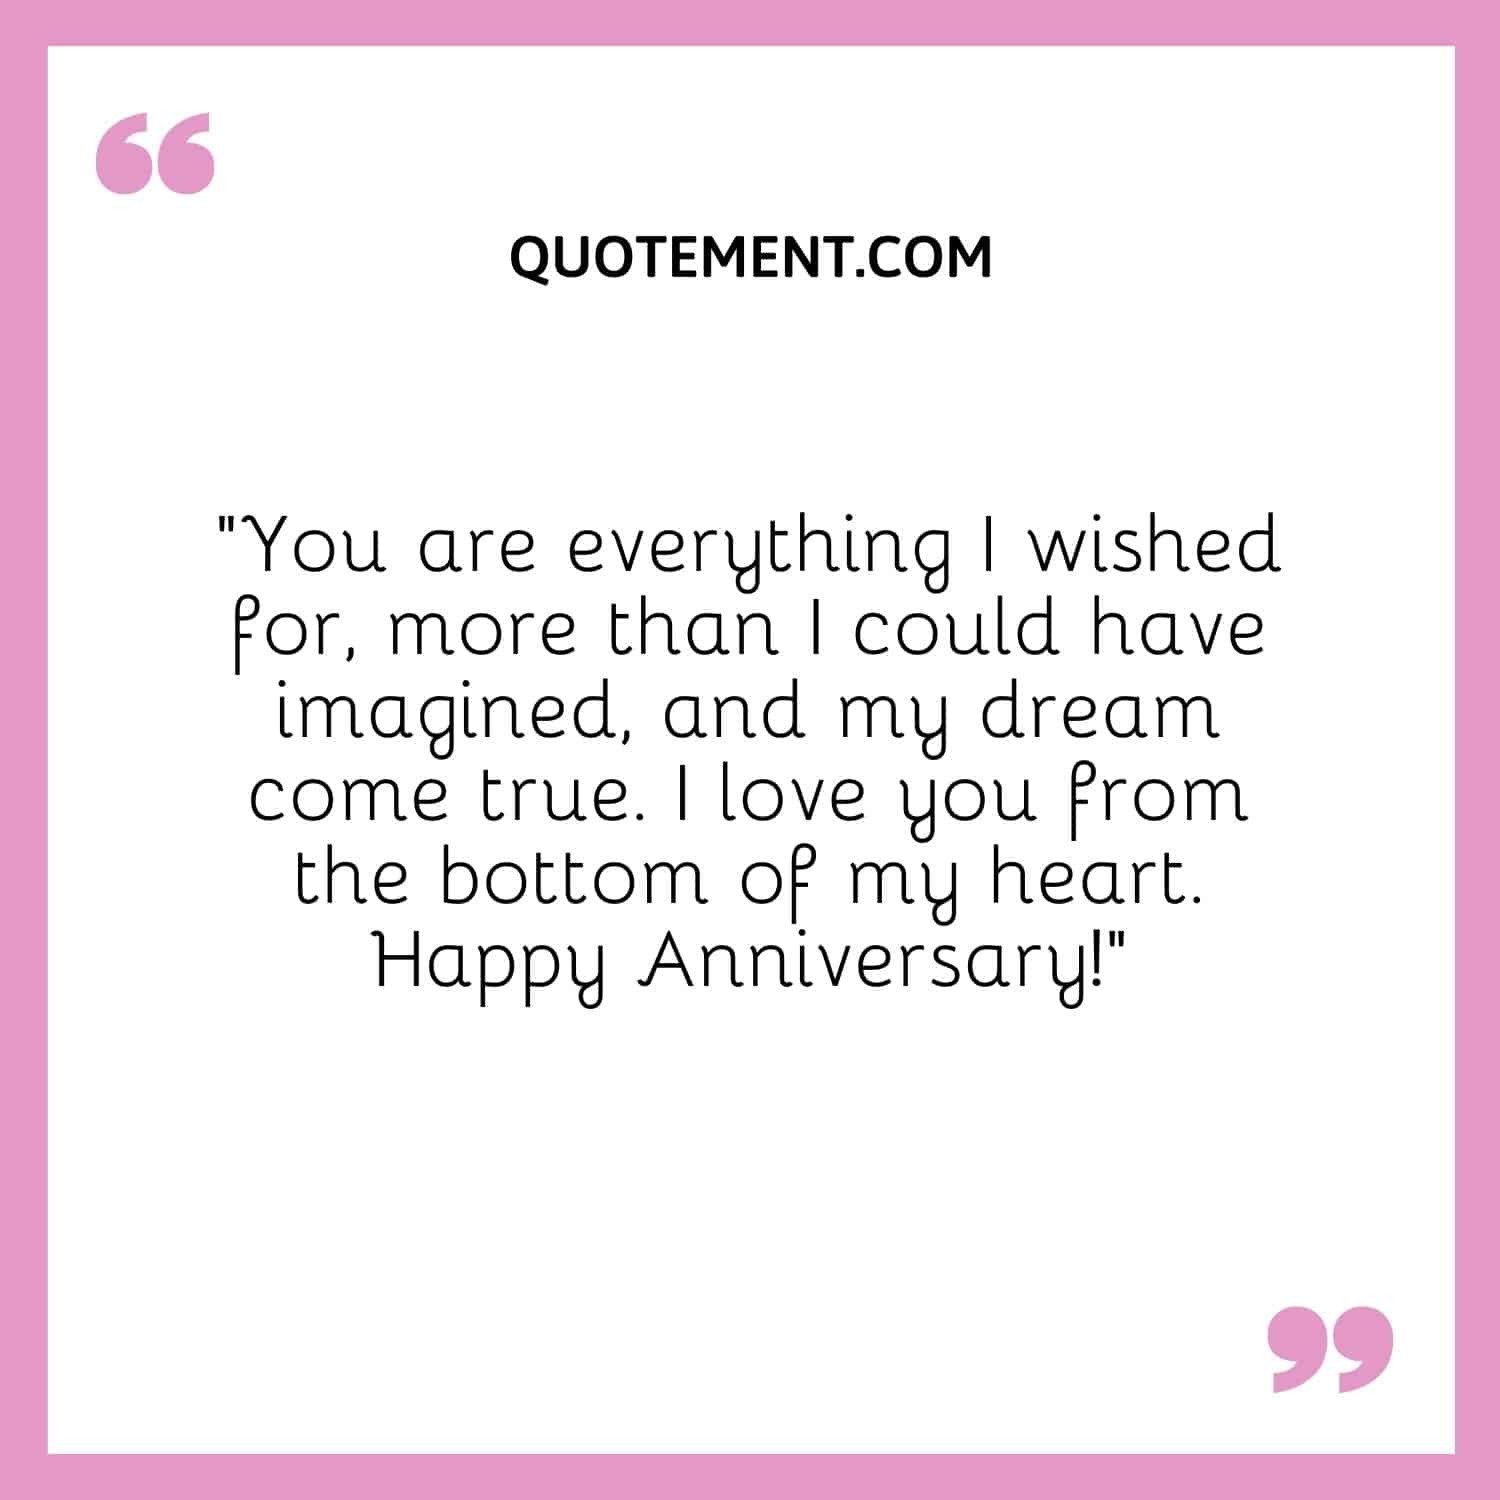 “You are everything I wished for, more than I could have imagined, and my dream come true. I love you from the bottom of my heart. Happy Anniversary!”